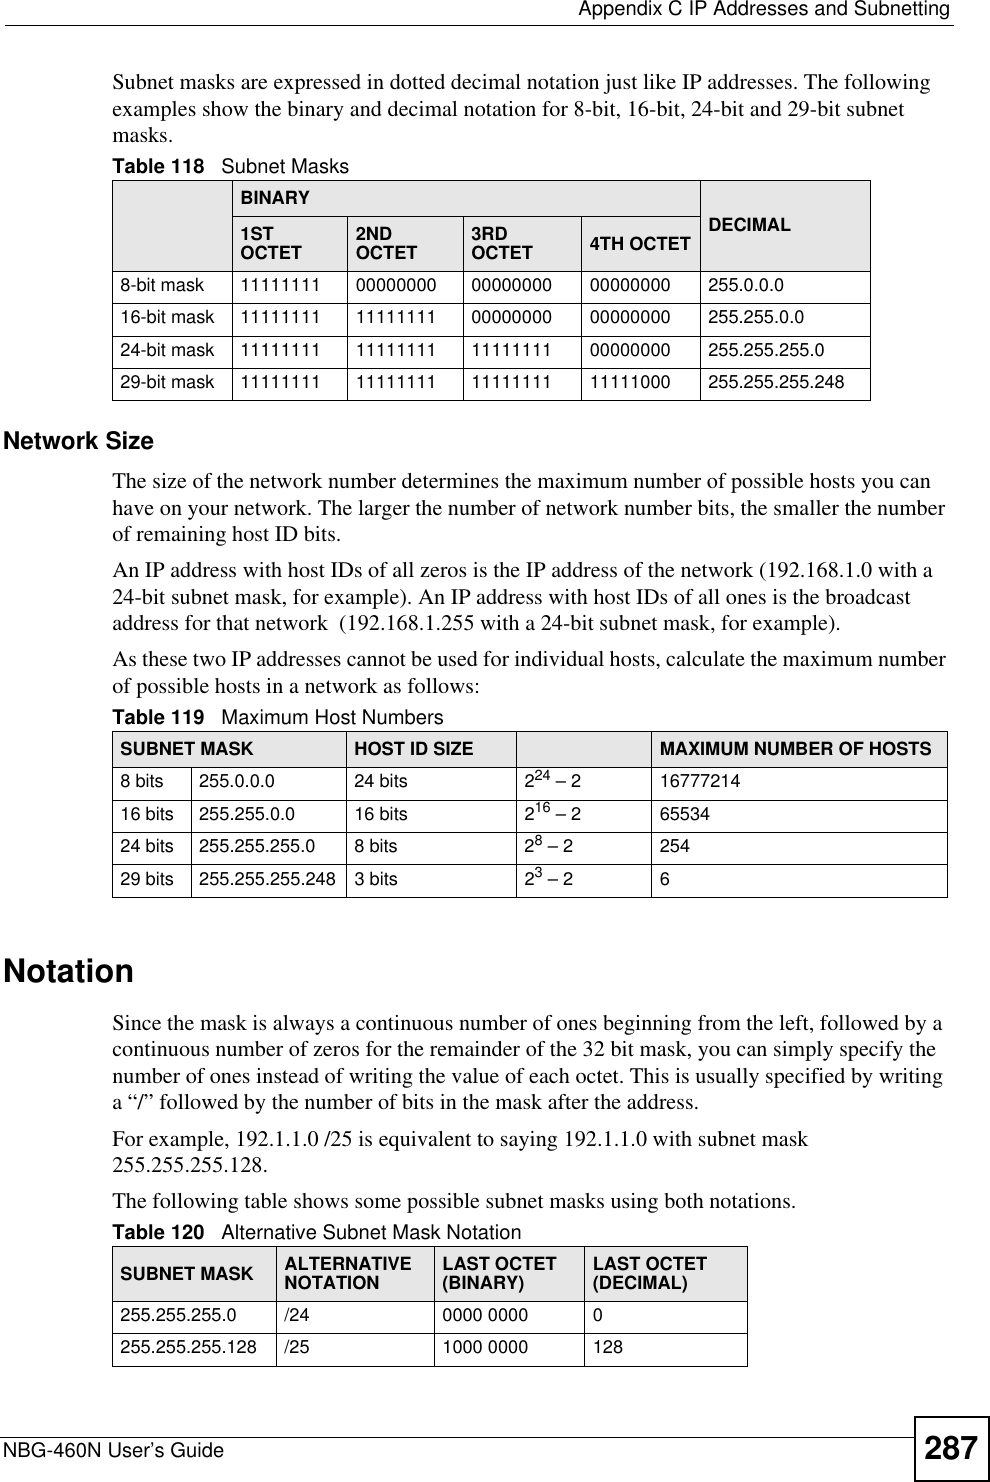  Appendix C IP Addresses and SubnettingNBG-460N User’s Guide 287Subnet masks are expressed in dotted decimal notation just like IP addresses. The following examples show the binary and decimal notation for 8-bit, 16-bit, 24-bit and 29-bit subnet masks. Network SizeThe size of the network number determines the maximum number of possible hosts you can have on your network. The larger the number of network number bits, the smaller the number of remaining host ID bits. An IP address with host IDs of all zeros is the IP address of the network (192.168.1.0 with a 24-bit subnet mask, for example). An IP address with host IDs of all ones is the broadcast address for that network  (192.168.1.255 with a 24-bit subnet mask, for example).As these two IP addresses cannot be used for individual hosts, calculate the maximum number of possible hosts in a network as follows:NotationSince the mask is always a continuous number of ones beginning from the left, followed by a continuous number of zeros for the remainder of the 32 bit mask, you can simply specify the number of ones instead of writing the value of each octet. This is usually specified by writing a “/” followed by the number of bits in the mask after the address. For example, 192.1.1.0 /25 is equivalent to saying 192.1.1.0 with subnet mask 255.255.255.128. The following table shows some possible subnet masks using both notations. Table 118   Subnet MasksBINARYDECIMAL1ST OCTET 2ND OCTET 3RD OCTET 4TH OCTET8-bit mask 11111111 00000000 00000000 00000000 255.0.0.016-bit mask 11111111 11111111 00000000 00000000 255.255.0.024-bit mask 11111111 11111111 11111111 00000000 255.255.255.029-bit mask 11111111 11111111 11111111 11111000 255.255.255.248Table 119   Maximum Host NumbersSUBNET MASK HOST ID SIZE MAXIMUM NUMBER OF HOSTS8 bits 255.0.0.0 24 bits 224 – 2 1677721416 bits 255.255.0.0 16 bits 216 – 2 6553424 bits 255.255.255.0 8 bits 28 – 2 25429 bits 255.255.255.248 3 bits 23 – 2 6Table 120   Alternative Subnet Mask NotationSUBNET MASK ALTERNATIVENOTATION LAST OCTET (BINARY) LAST OCTET (DECIMAL)255.255.255.0 /24 0000 0000 0255.255.255.128 /25 1000 0000 128